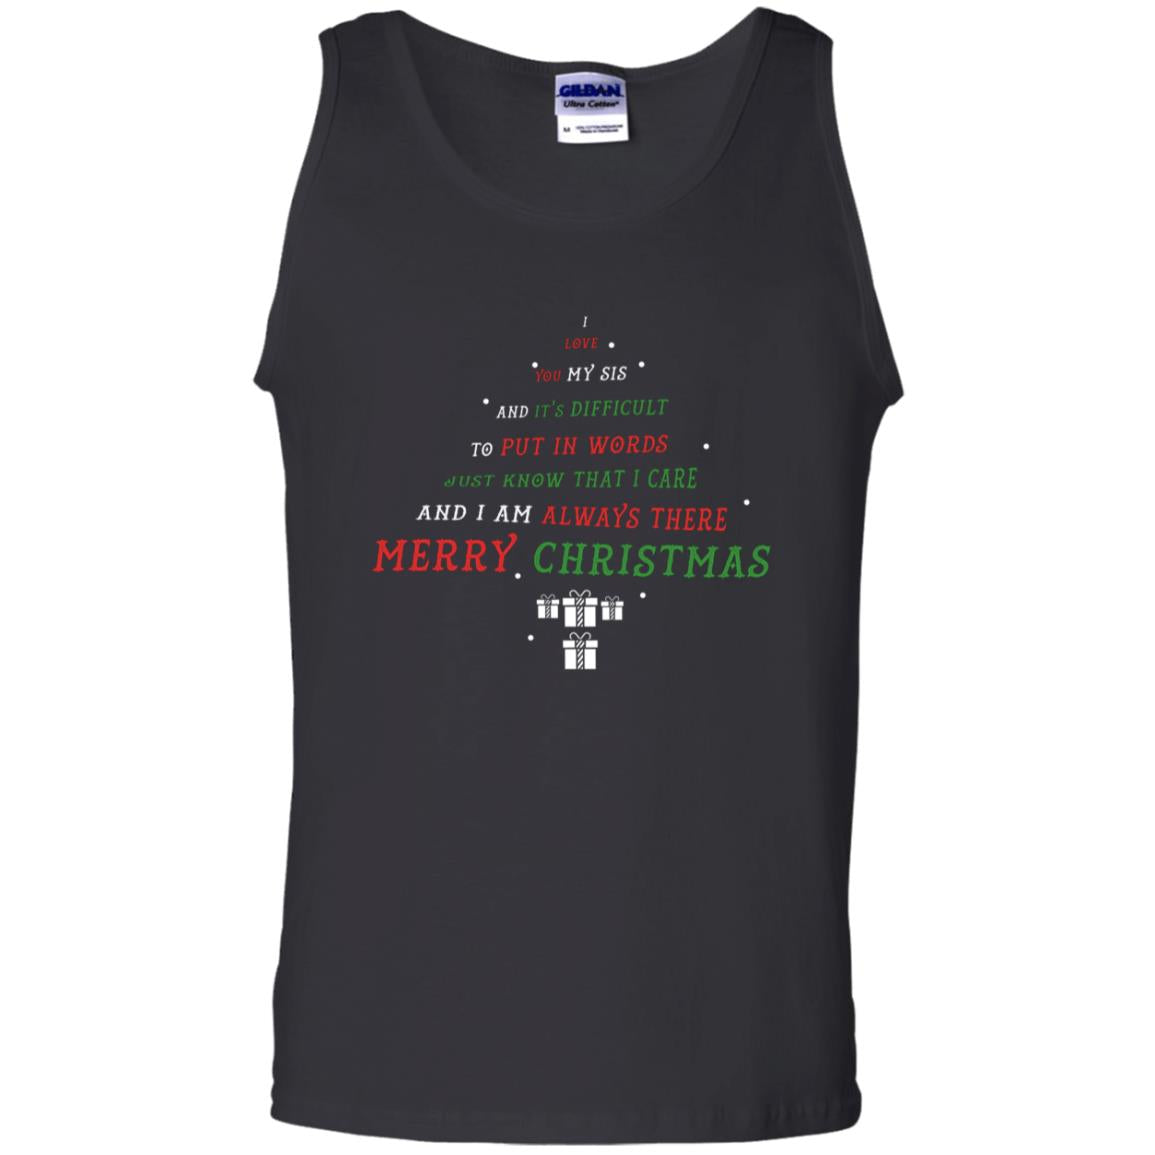 I Love You My Sis And Difficult To Put In Words Just Know That I Care  And I Am Always There Merry ChristmasG220 Gildan 100% Cotton Tank Top